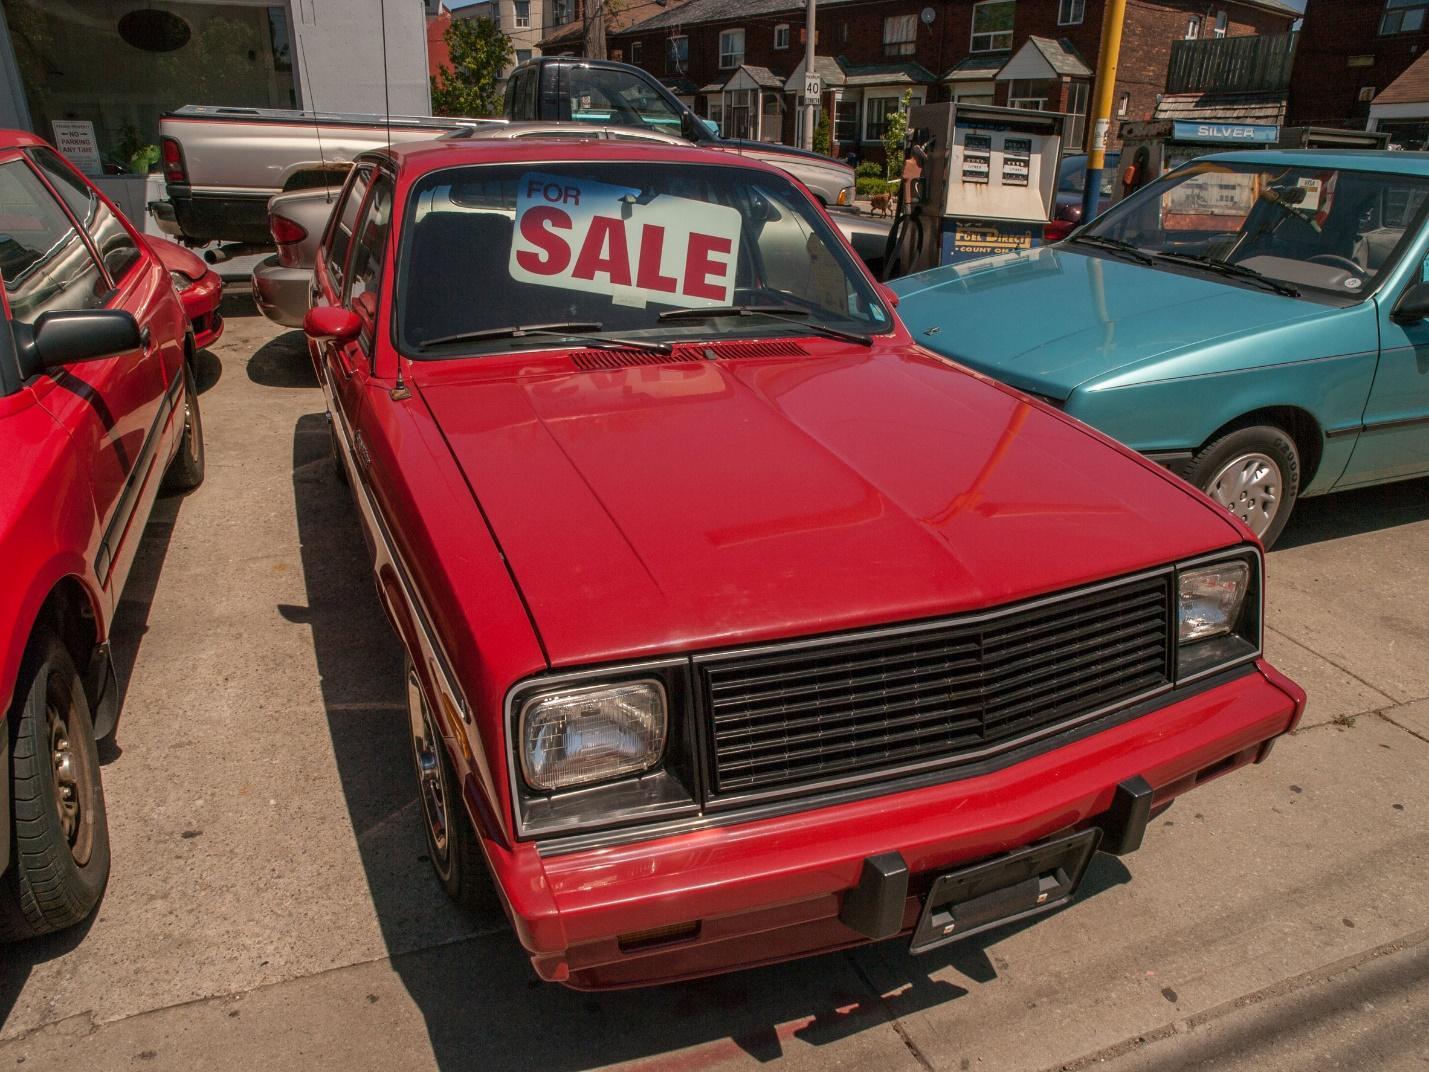 6 Red Flags to Watch for When Buying a Car